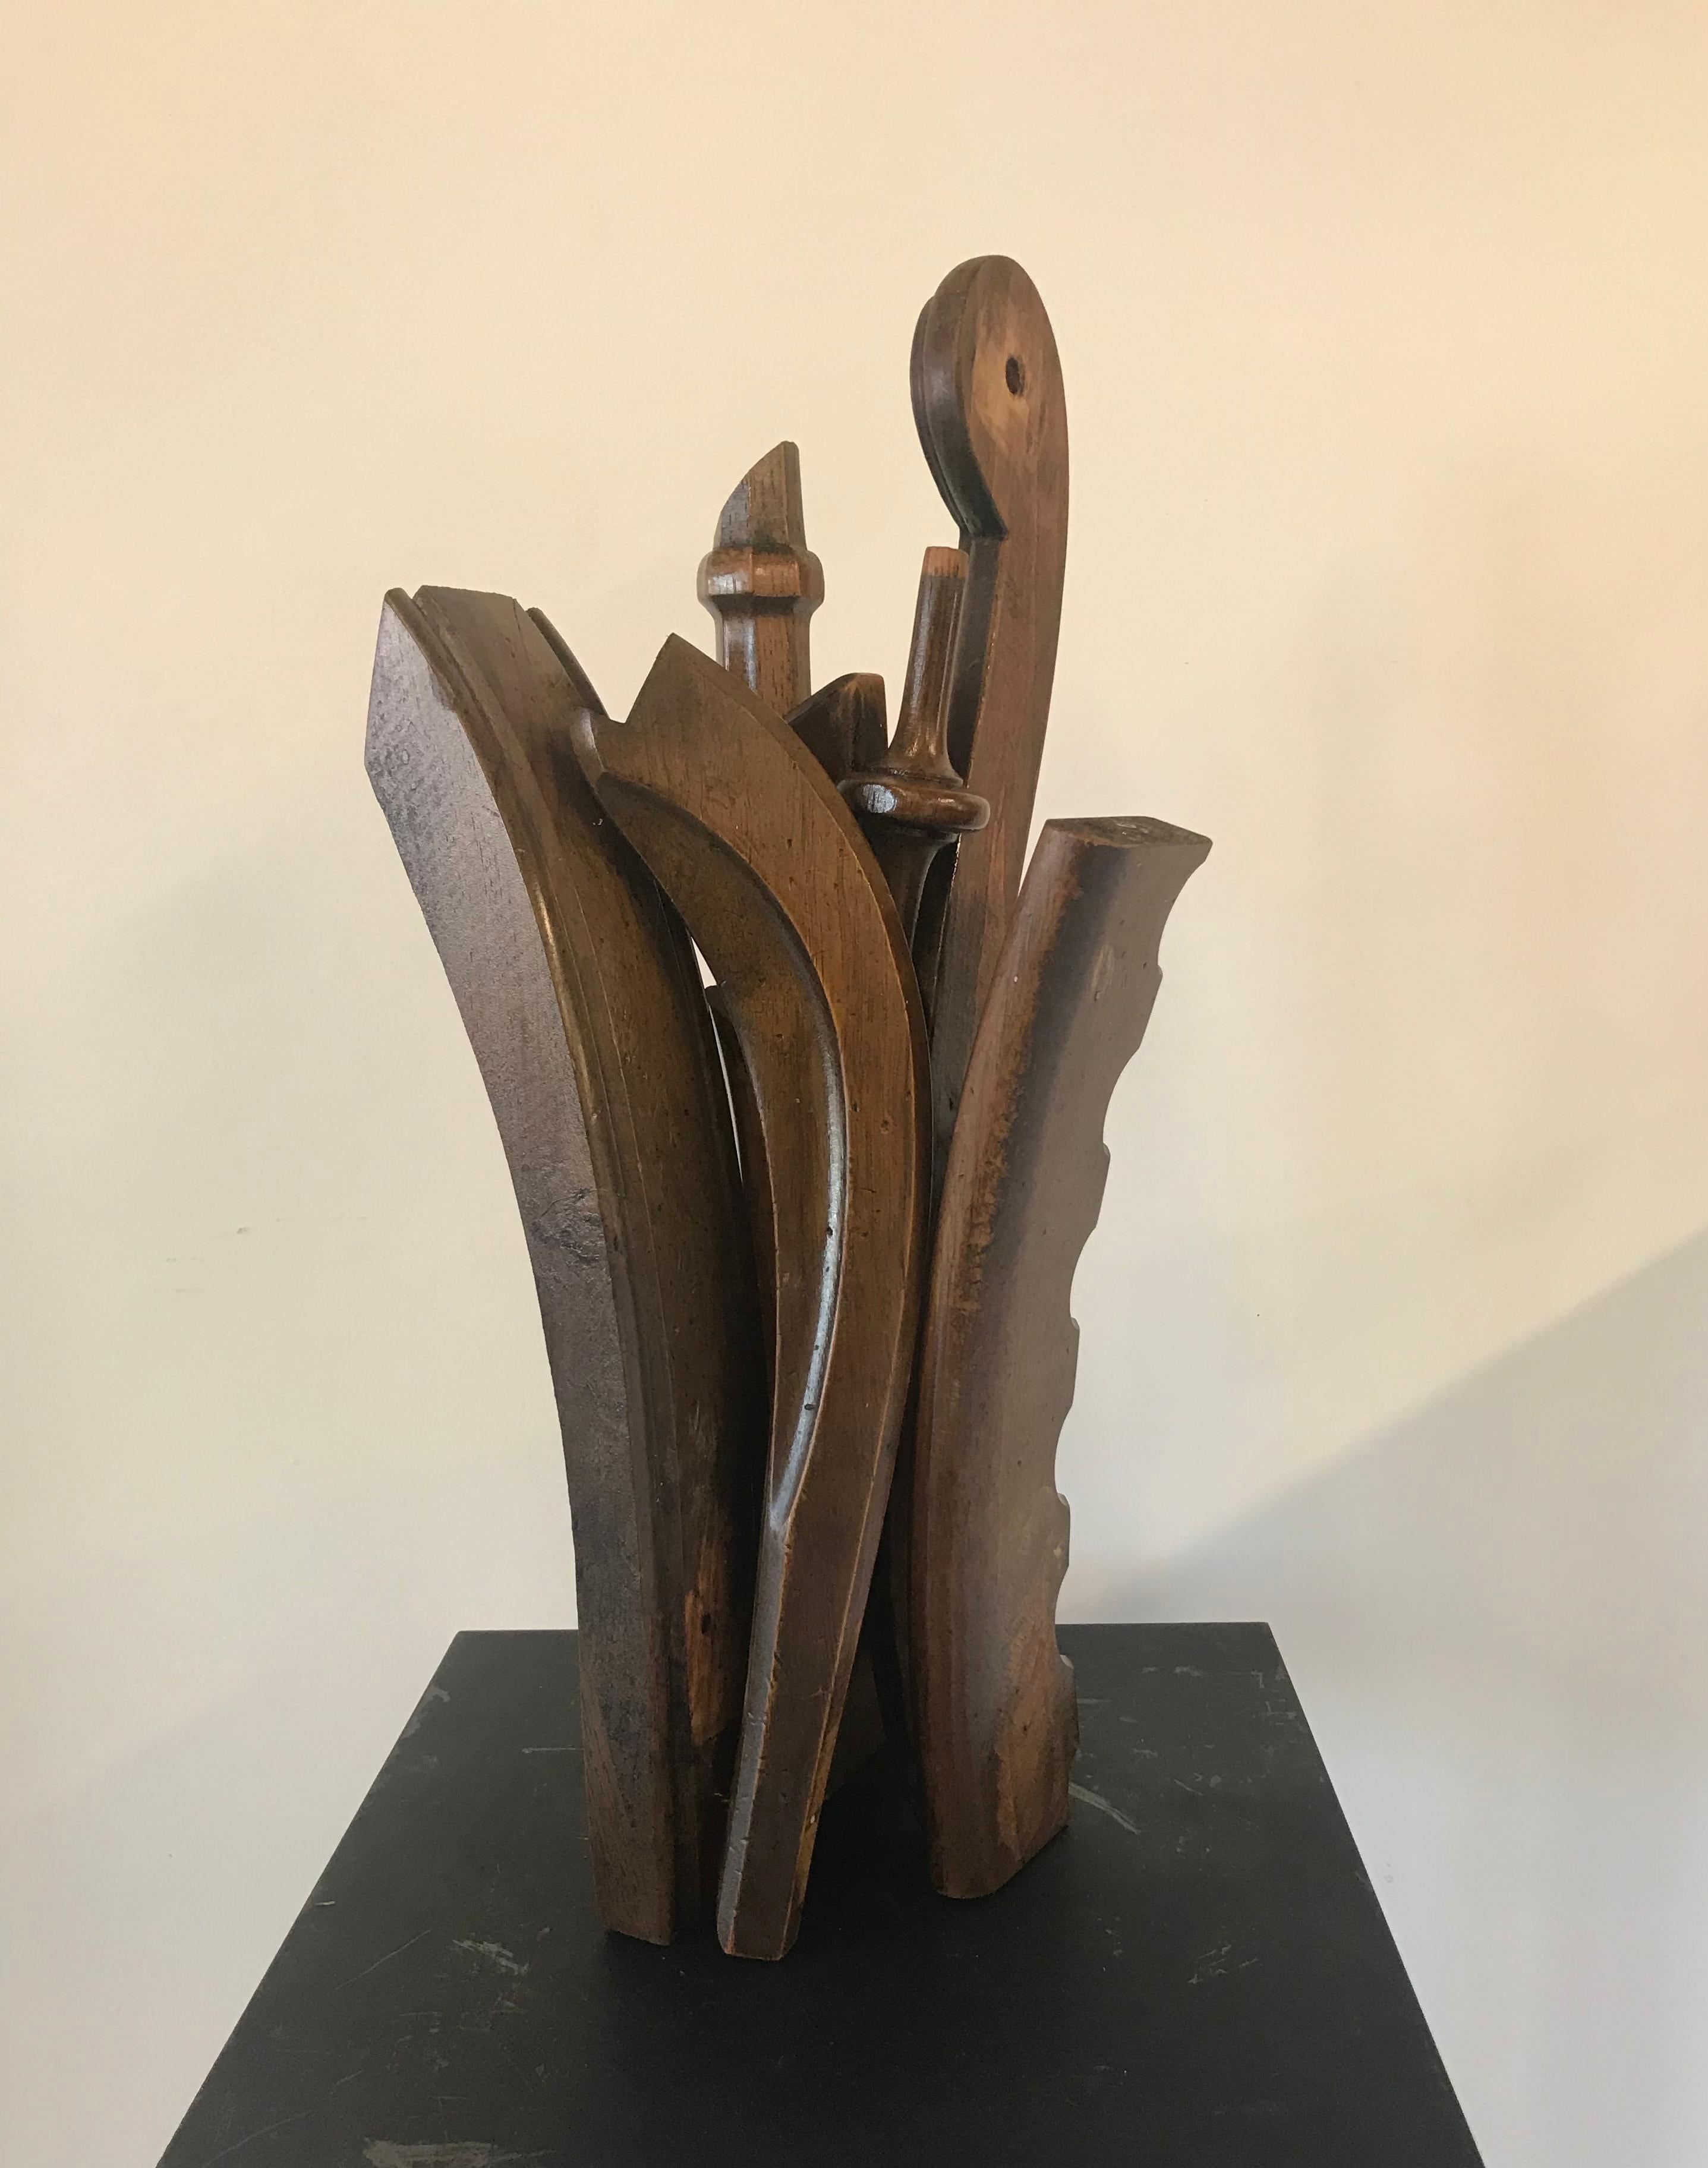 Tony Brown Abstract Sculpture - Wooden, Brown, Abstract, Sculpture, Found Objects